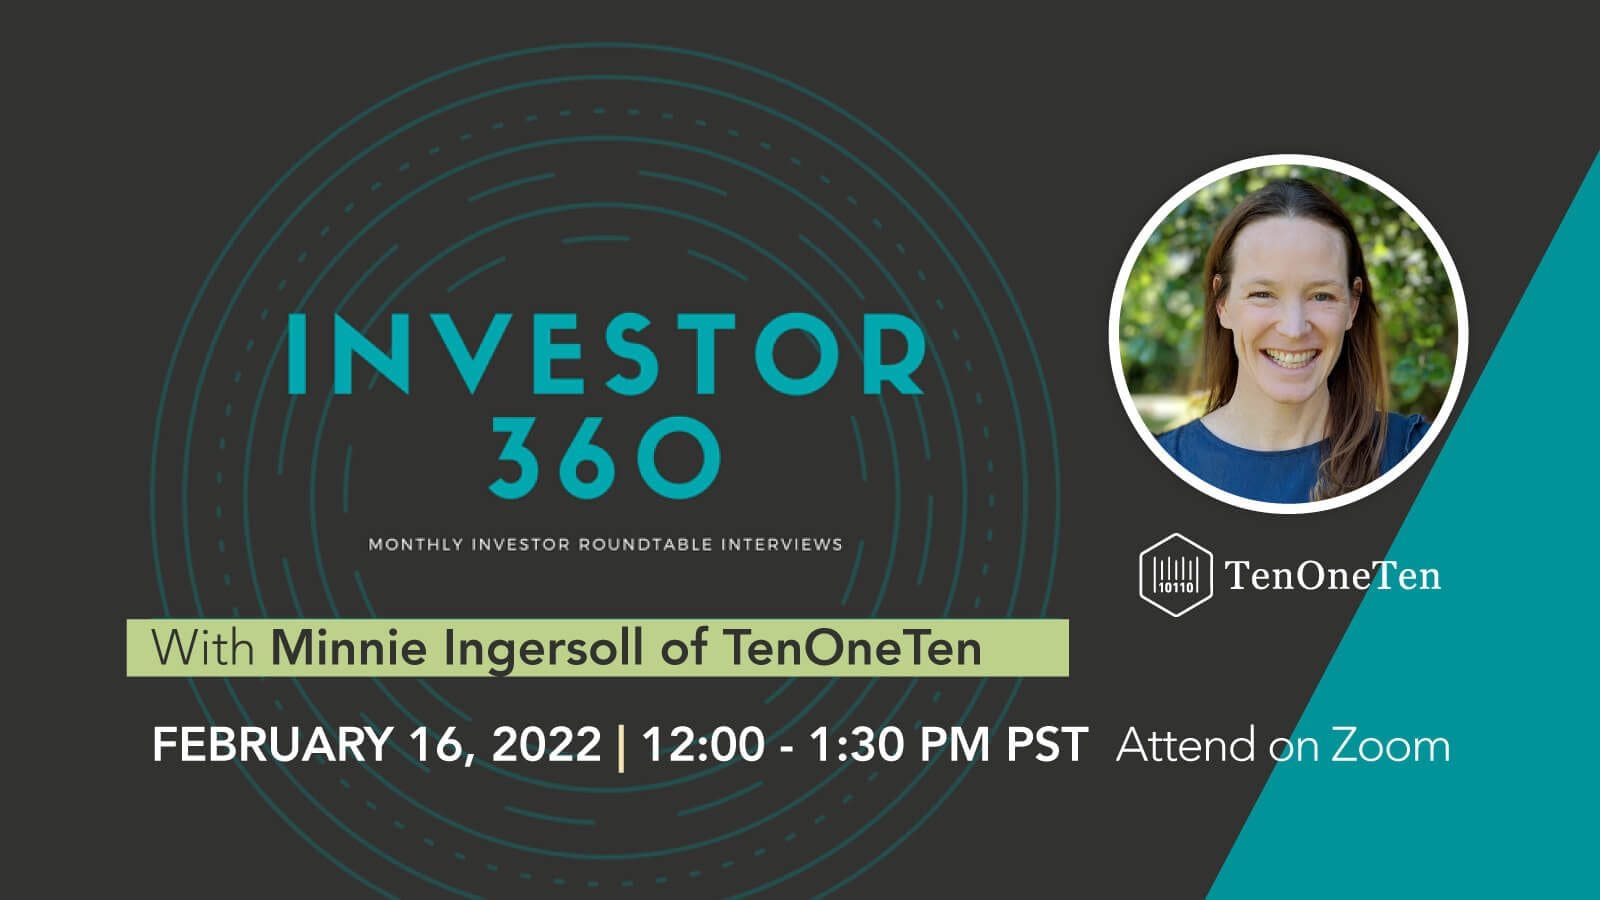 Join us for the Next Investor 360 Roundtable Interview with Minnie Ingersoll of TenOneTen